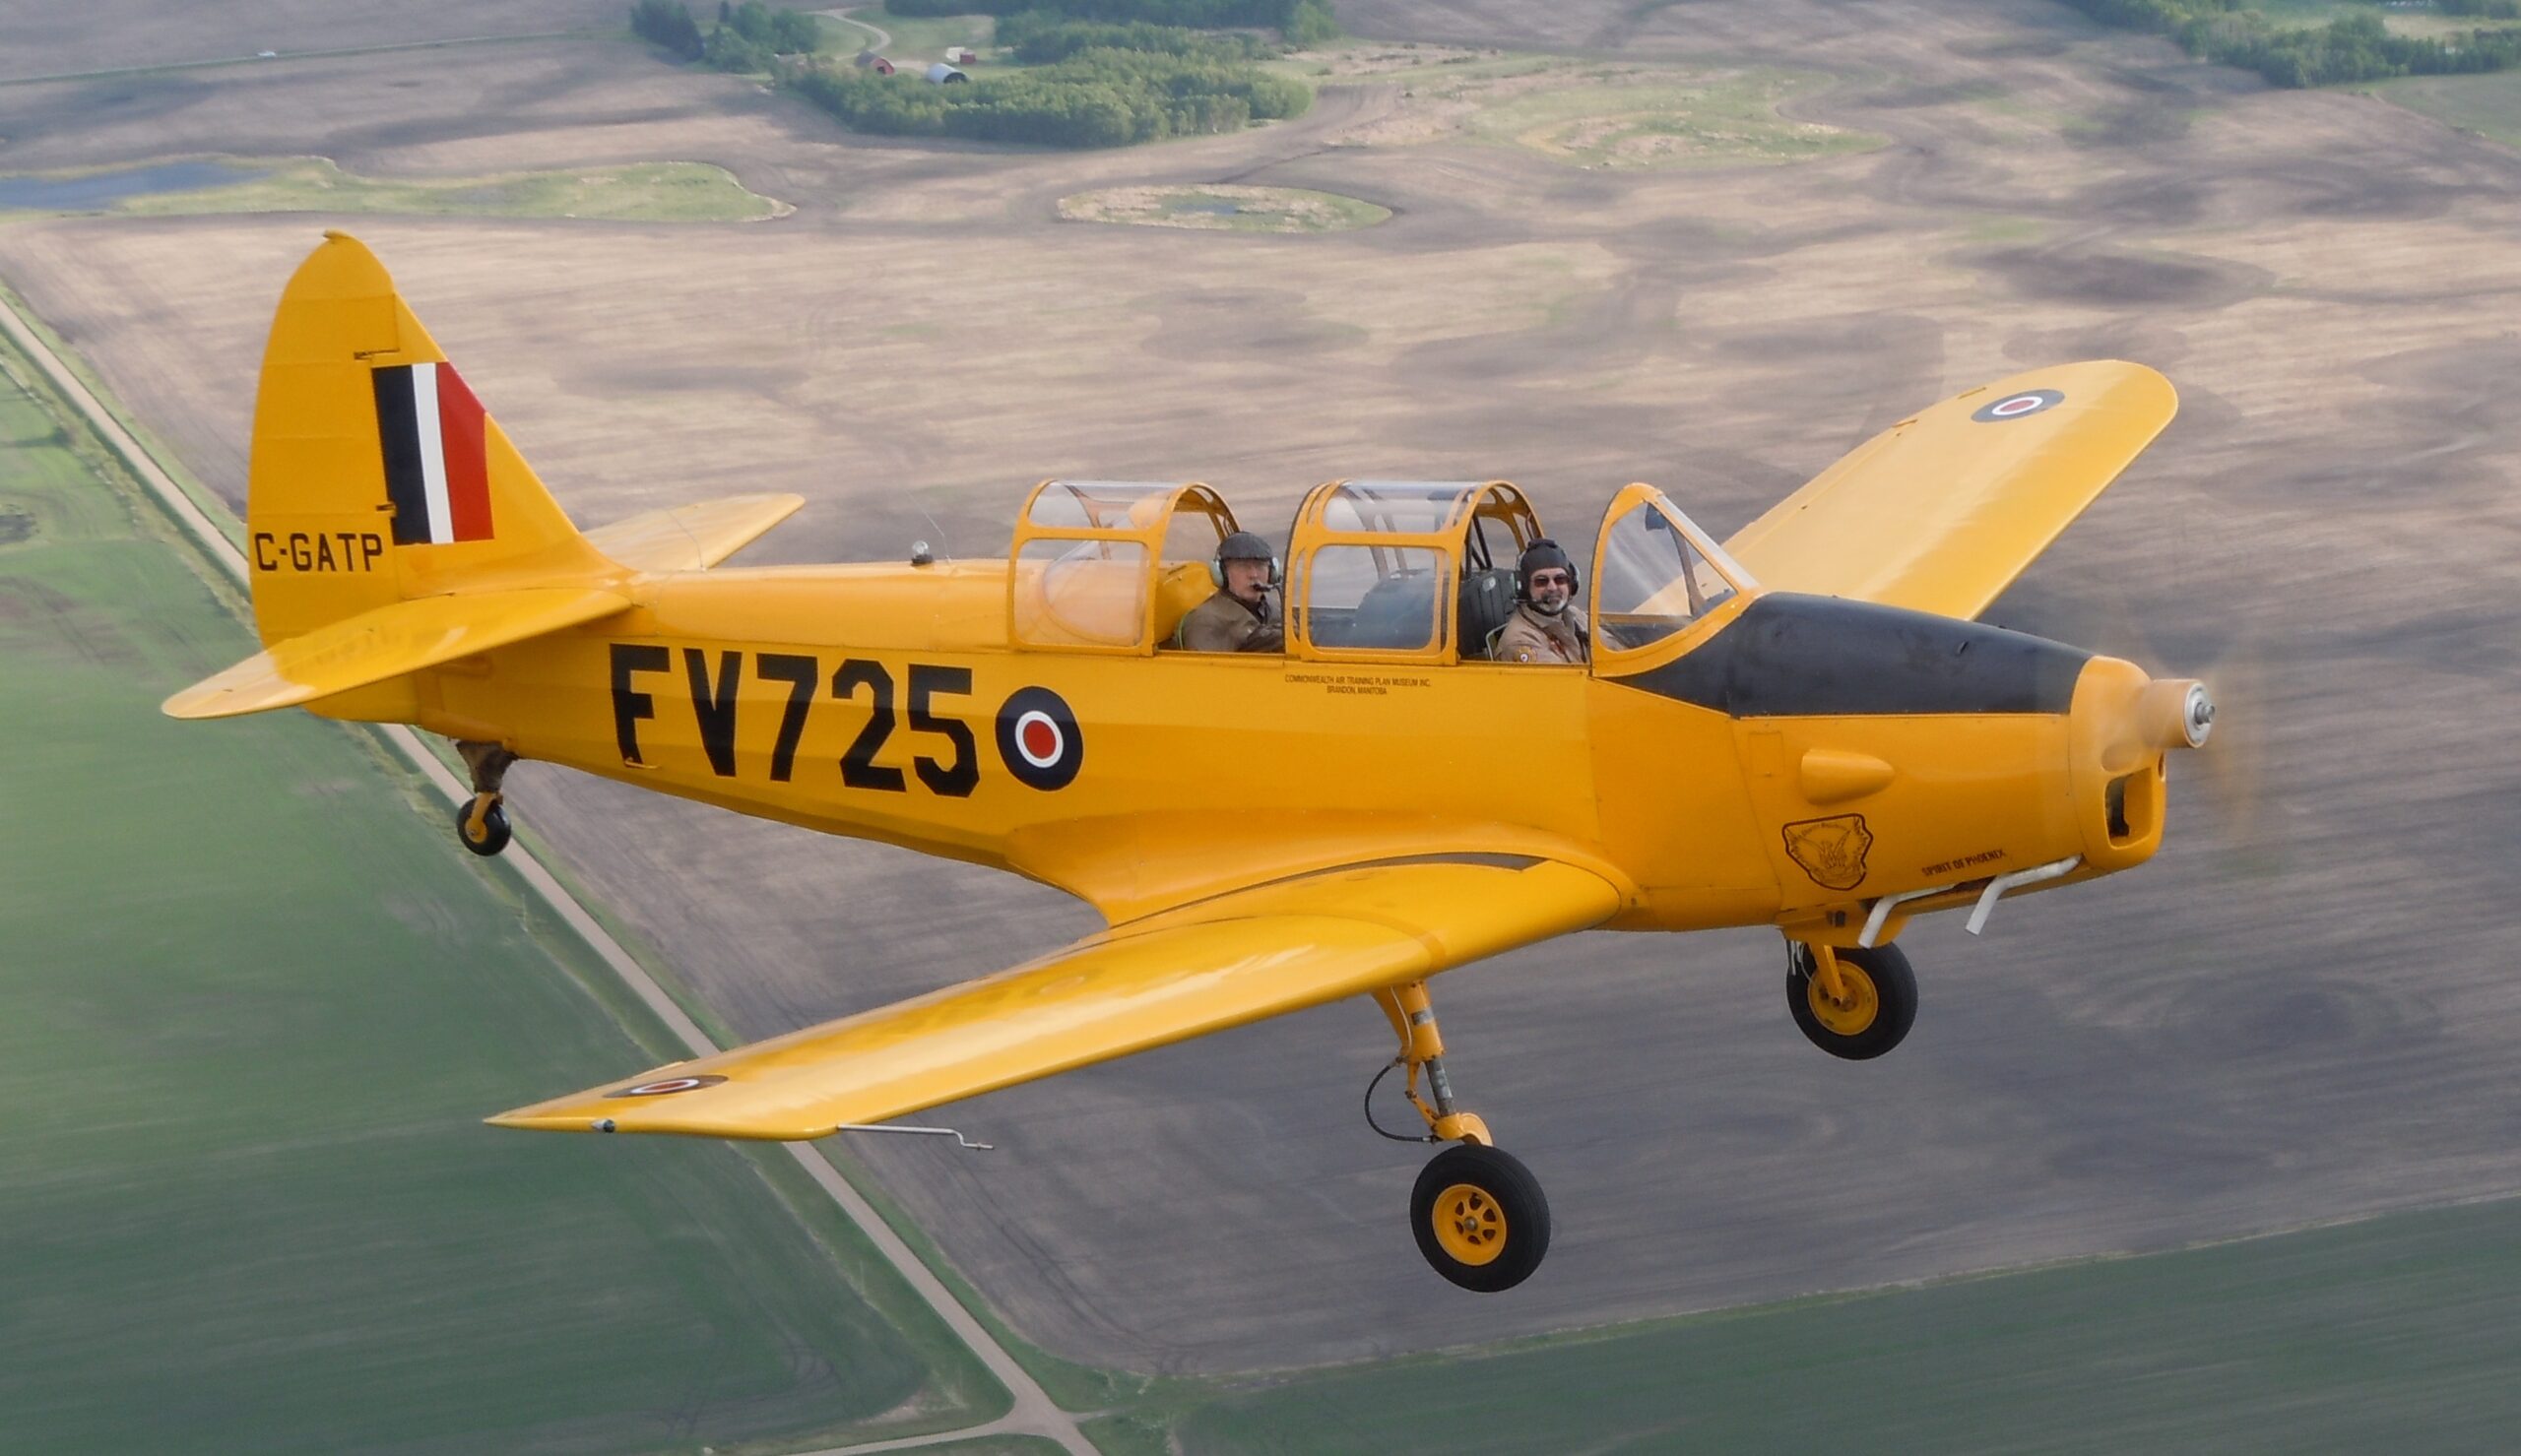 Fairchild Cornell PT26 aircraft flying above a patchwork of farmland. The aircraft is bright yellow, mostly fills the frame, and is seen from the right side. On its side, the call letters 'FV723' appear along with an RCAF roundel.